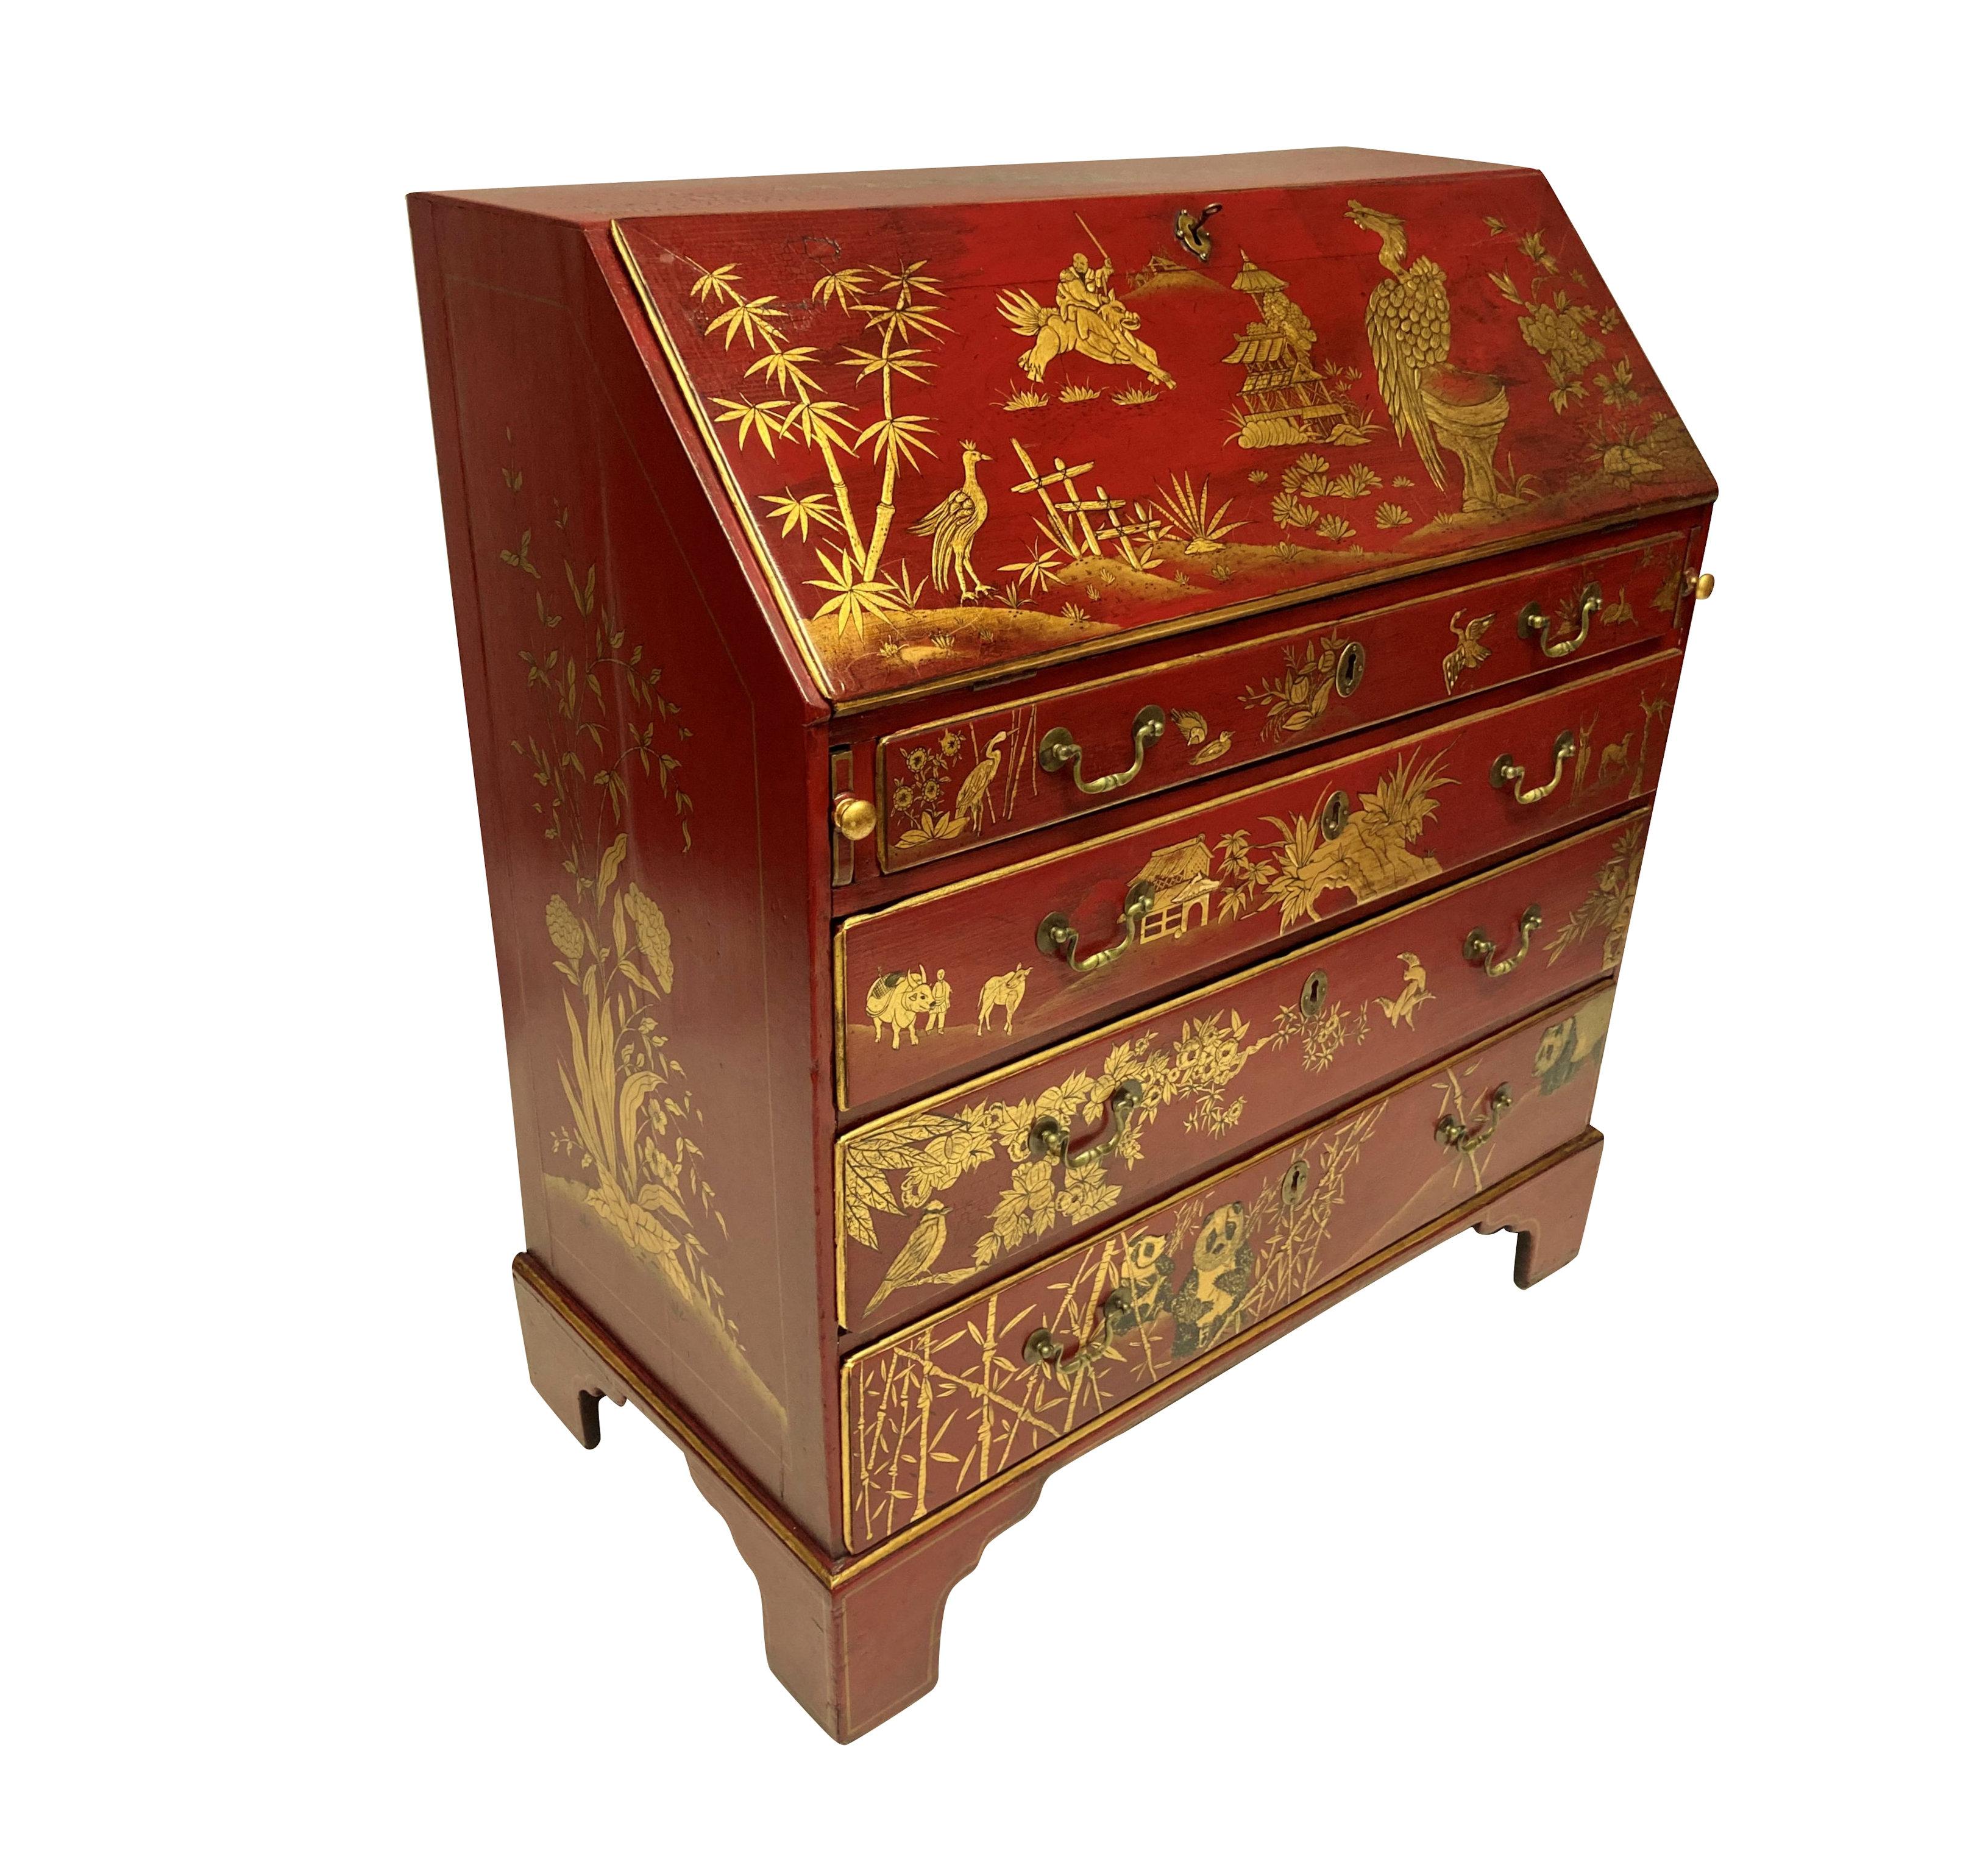 A fine English George III scarlet gilt-japanned secretaire; all the surfaces superbly decorated with rich gilt chinoiserie on a scarlet red background, the fall-front opening to reveal a similarly decorated writing slide and various pigeon-holes and